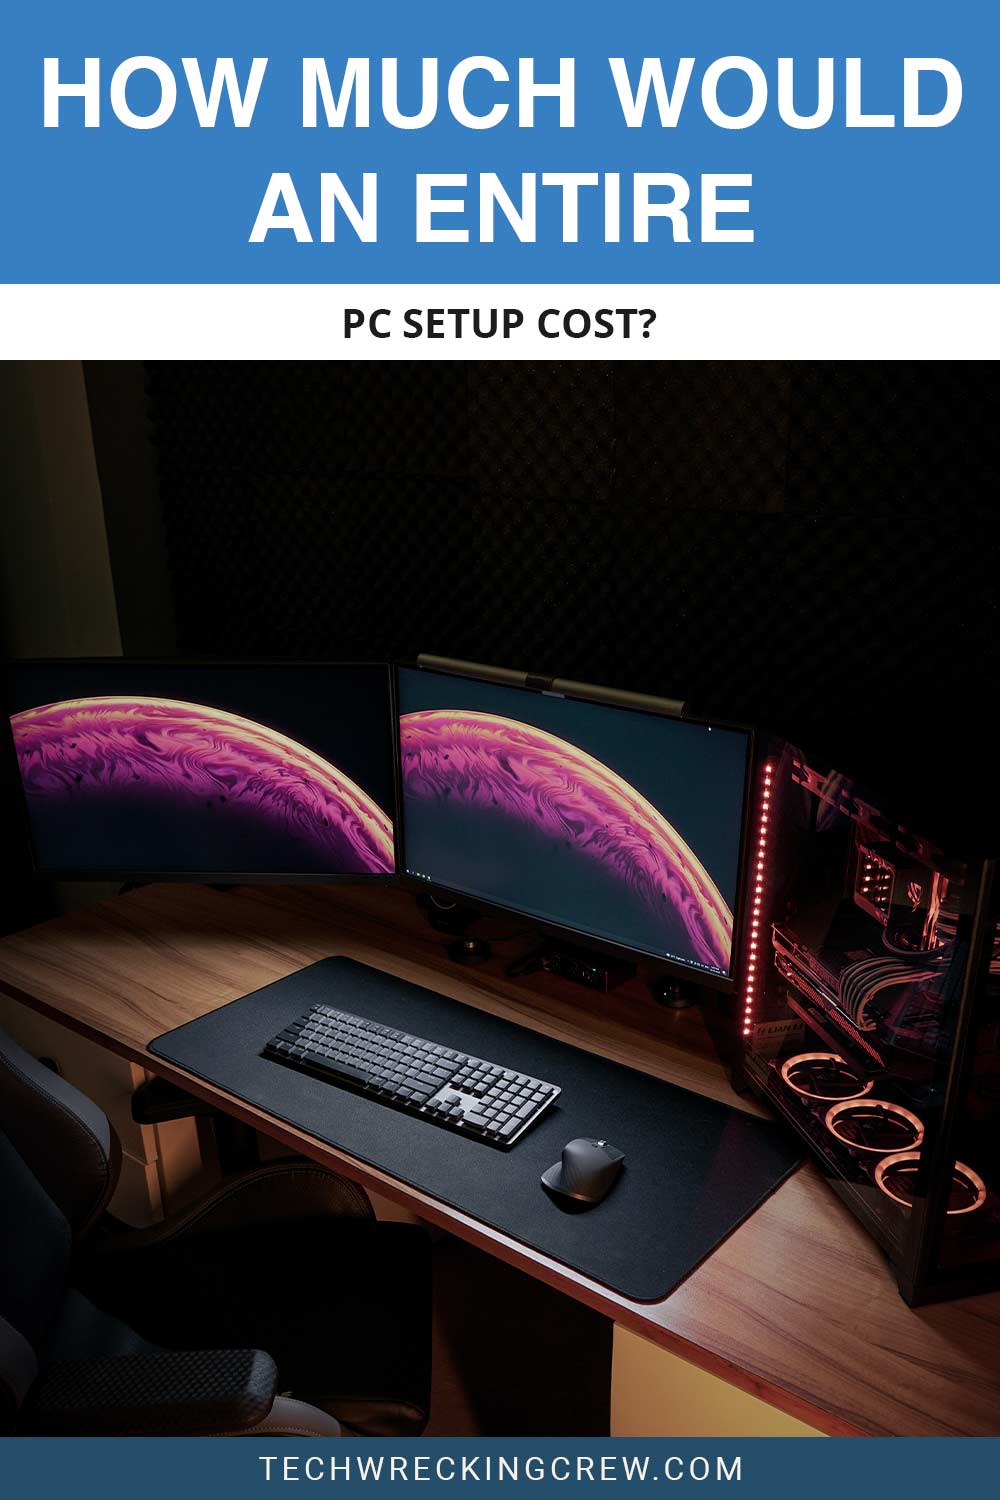 How much would an entire PC setup cost?